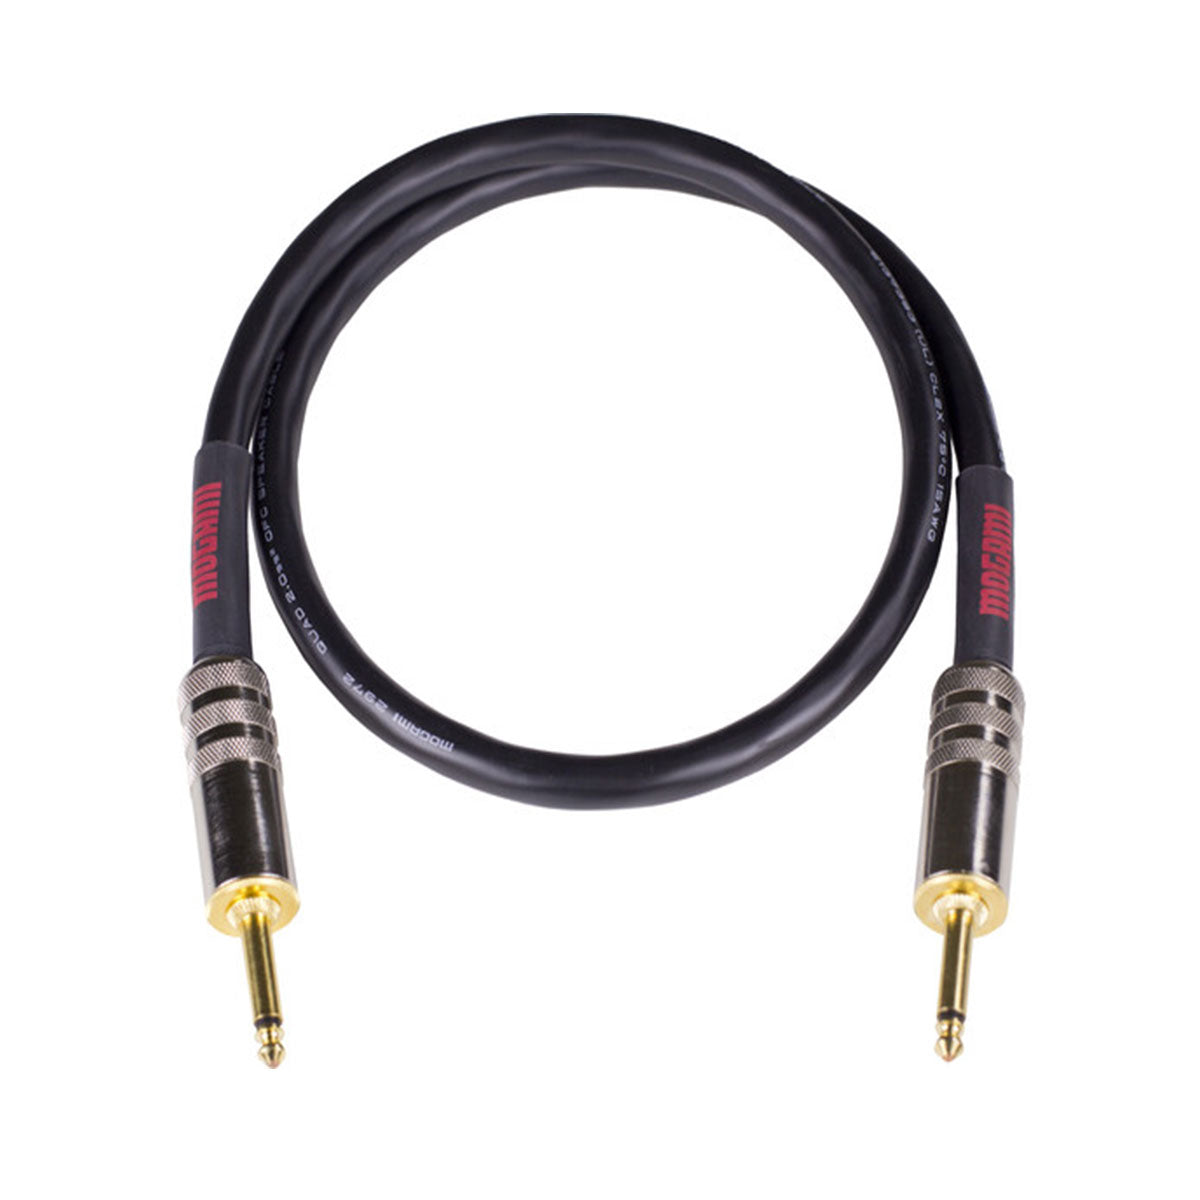 Mogami Overdrive  Series Amplifier-to-Cabinet Speaker Cable, 1/4” TS Male Plugs, Wide Body, Gold Contacts, Straight Connectors